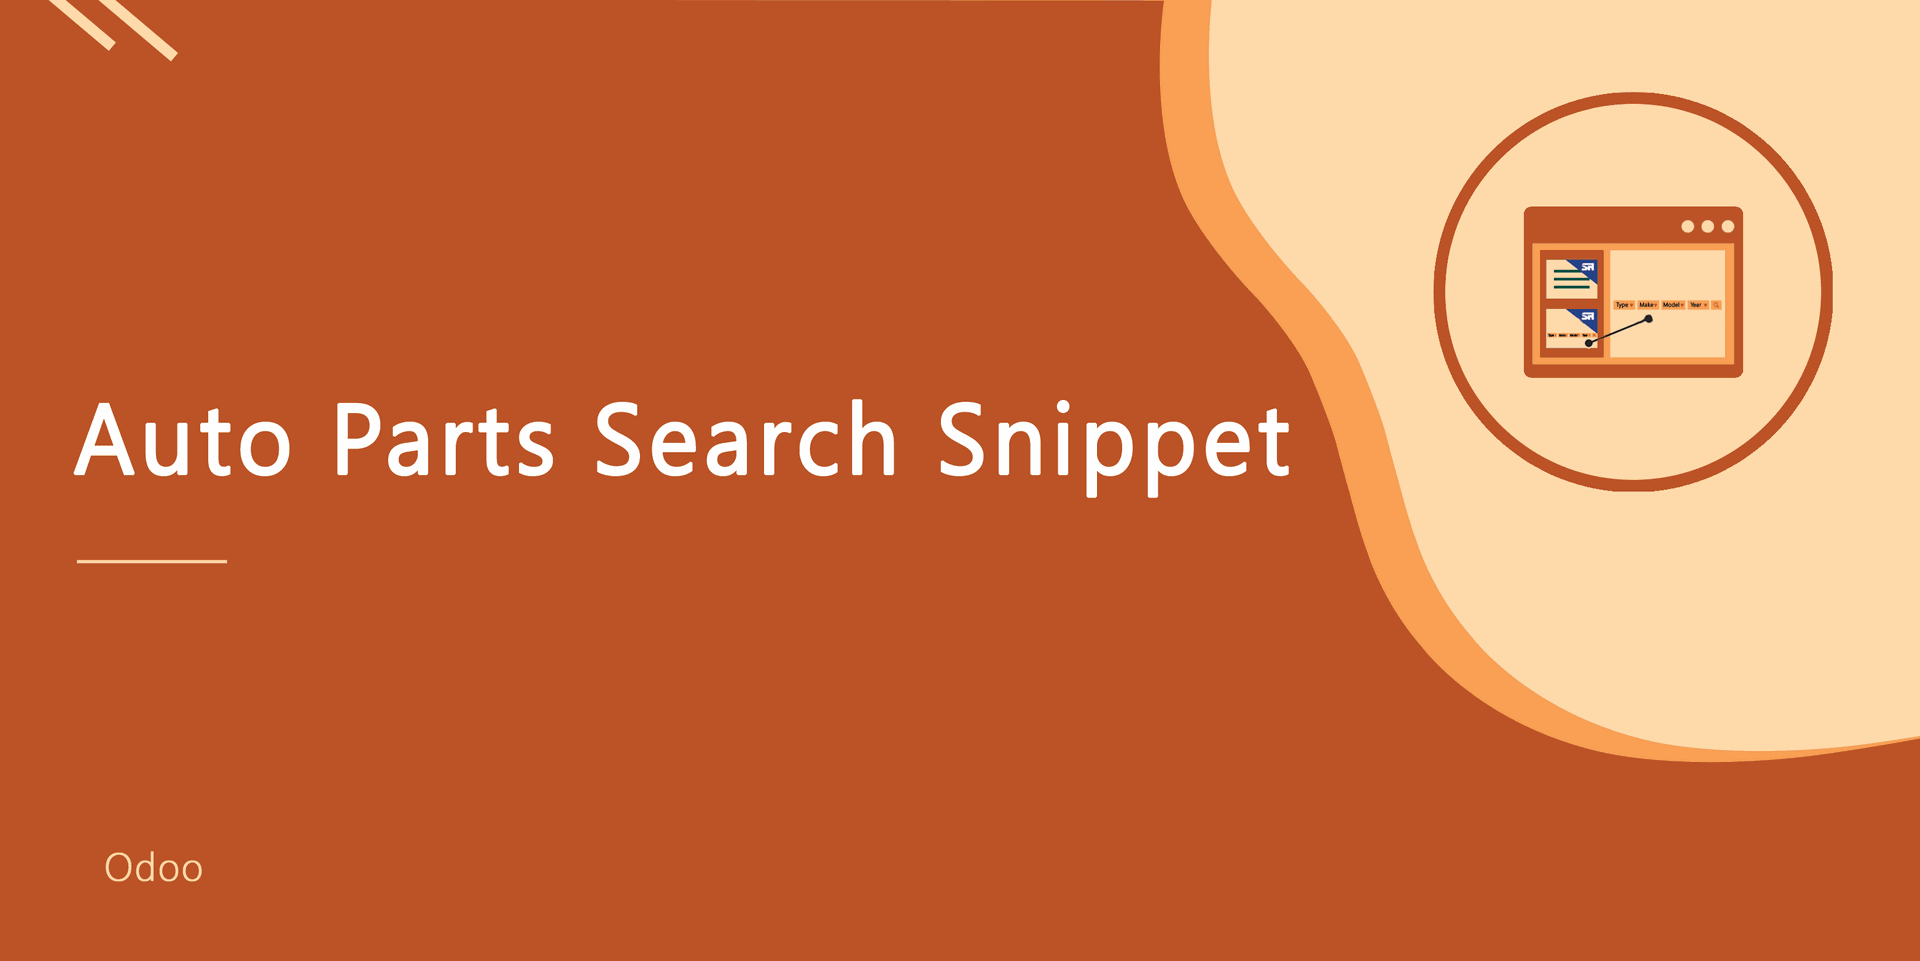 Auto Parts Search Snippet